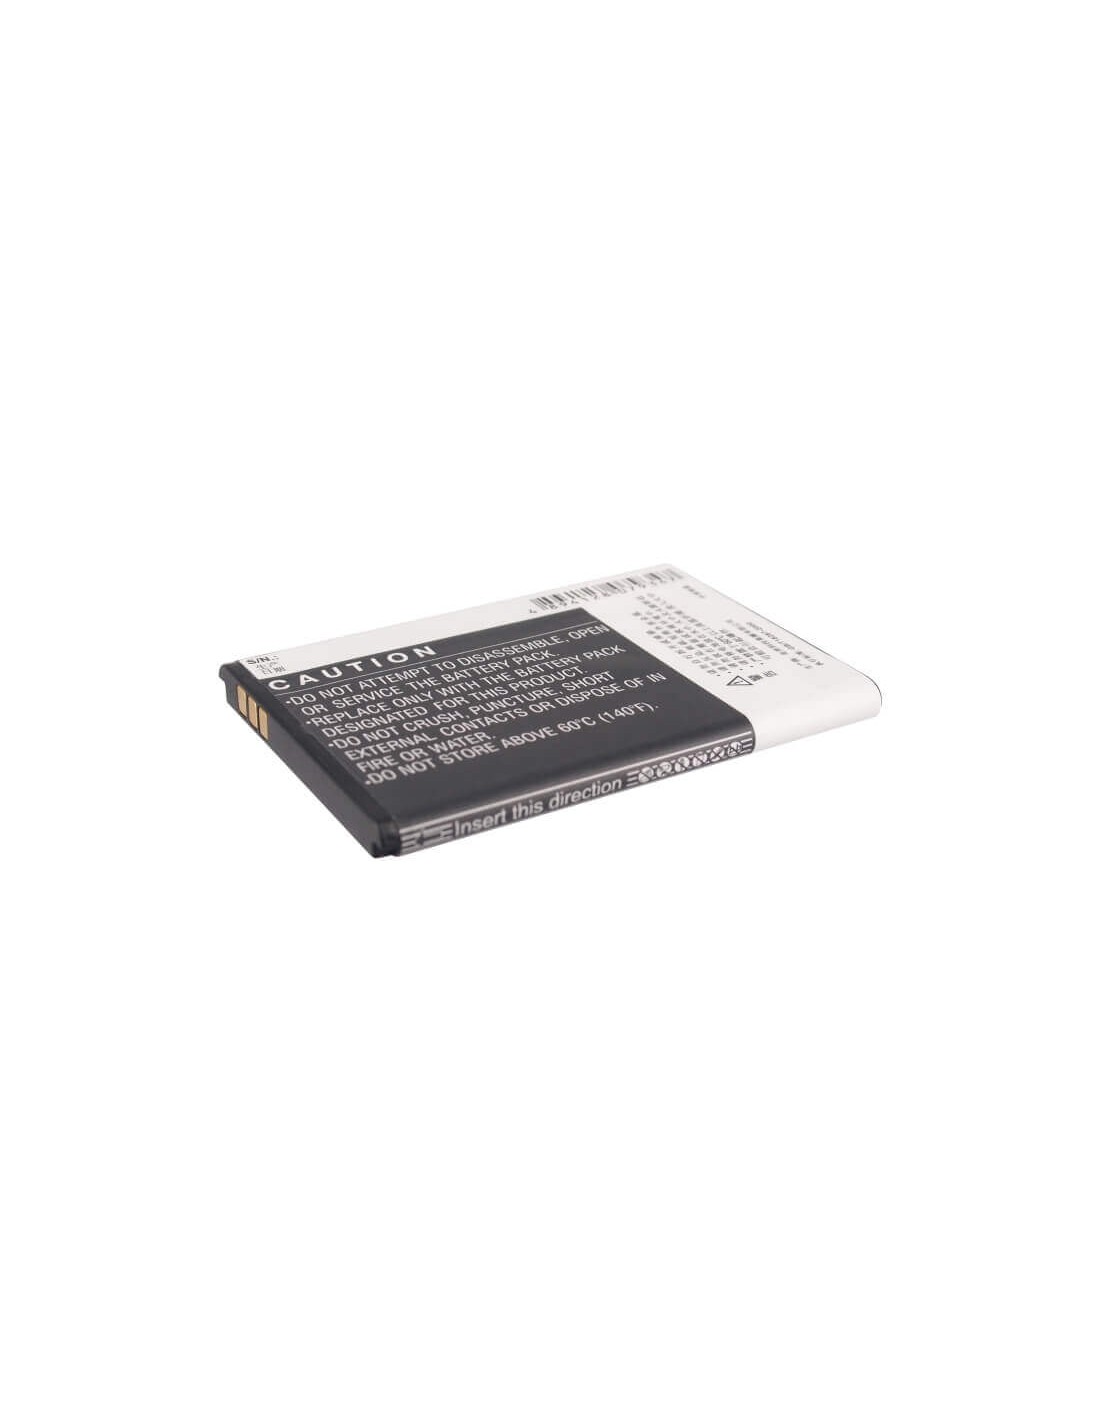 Battery for GIONEE A800 3.7V, 1700mAh - 6.29Wh